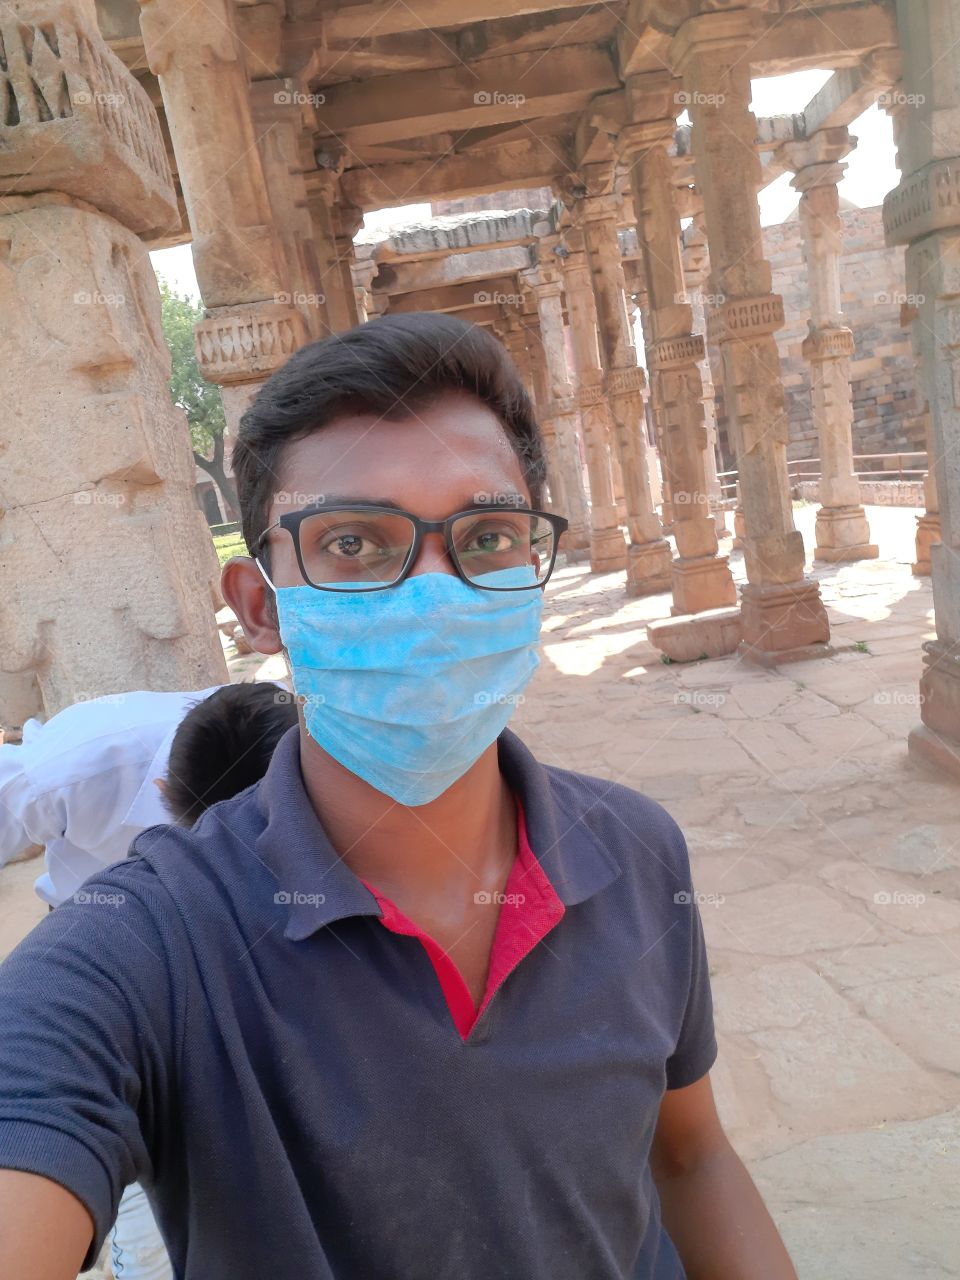 Selfie with amazing construction in india.